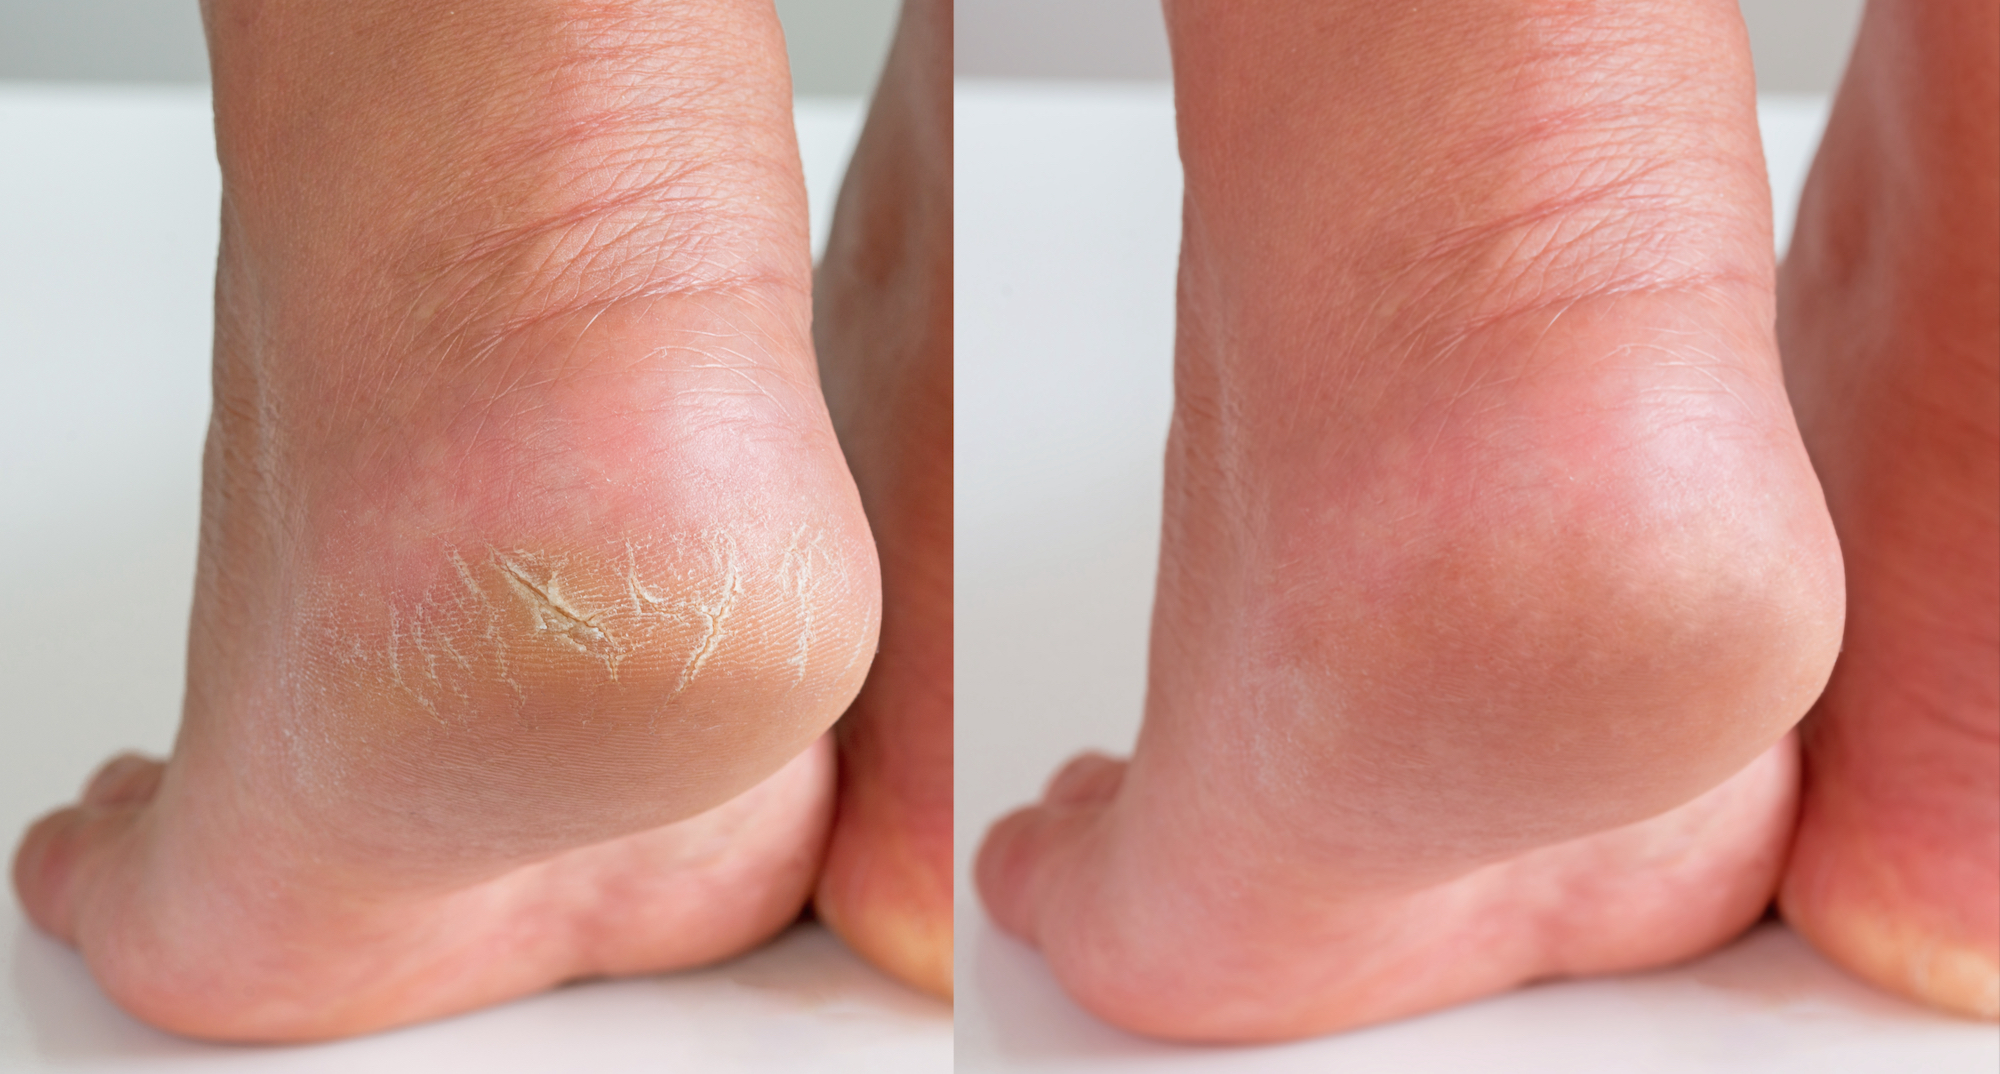 8 Home Remedies to Remove Cracked Heels and Get Beautiful Feet / Bright Side